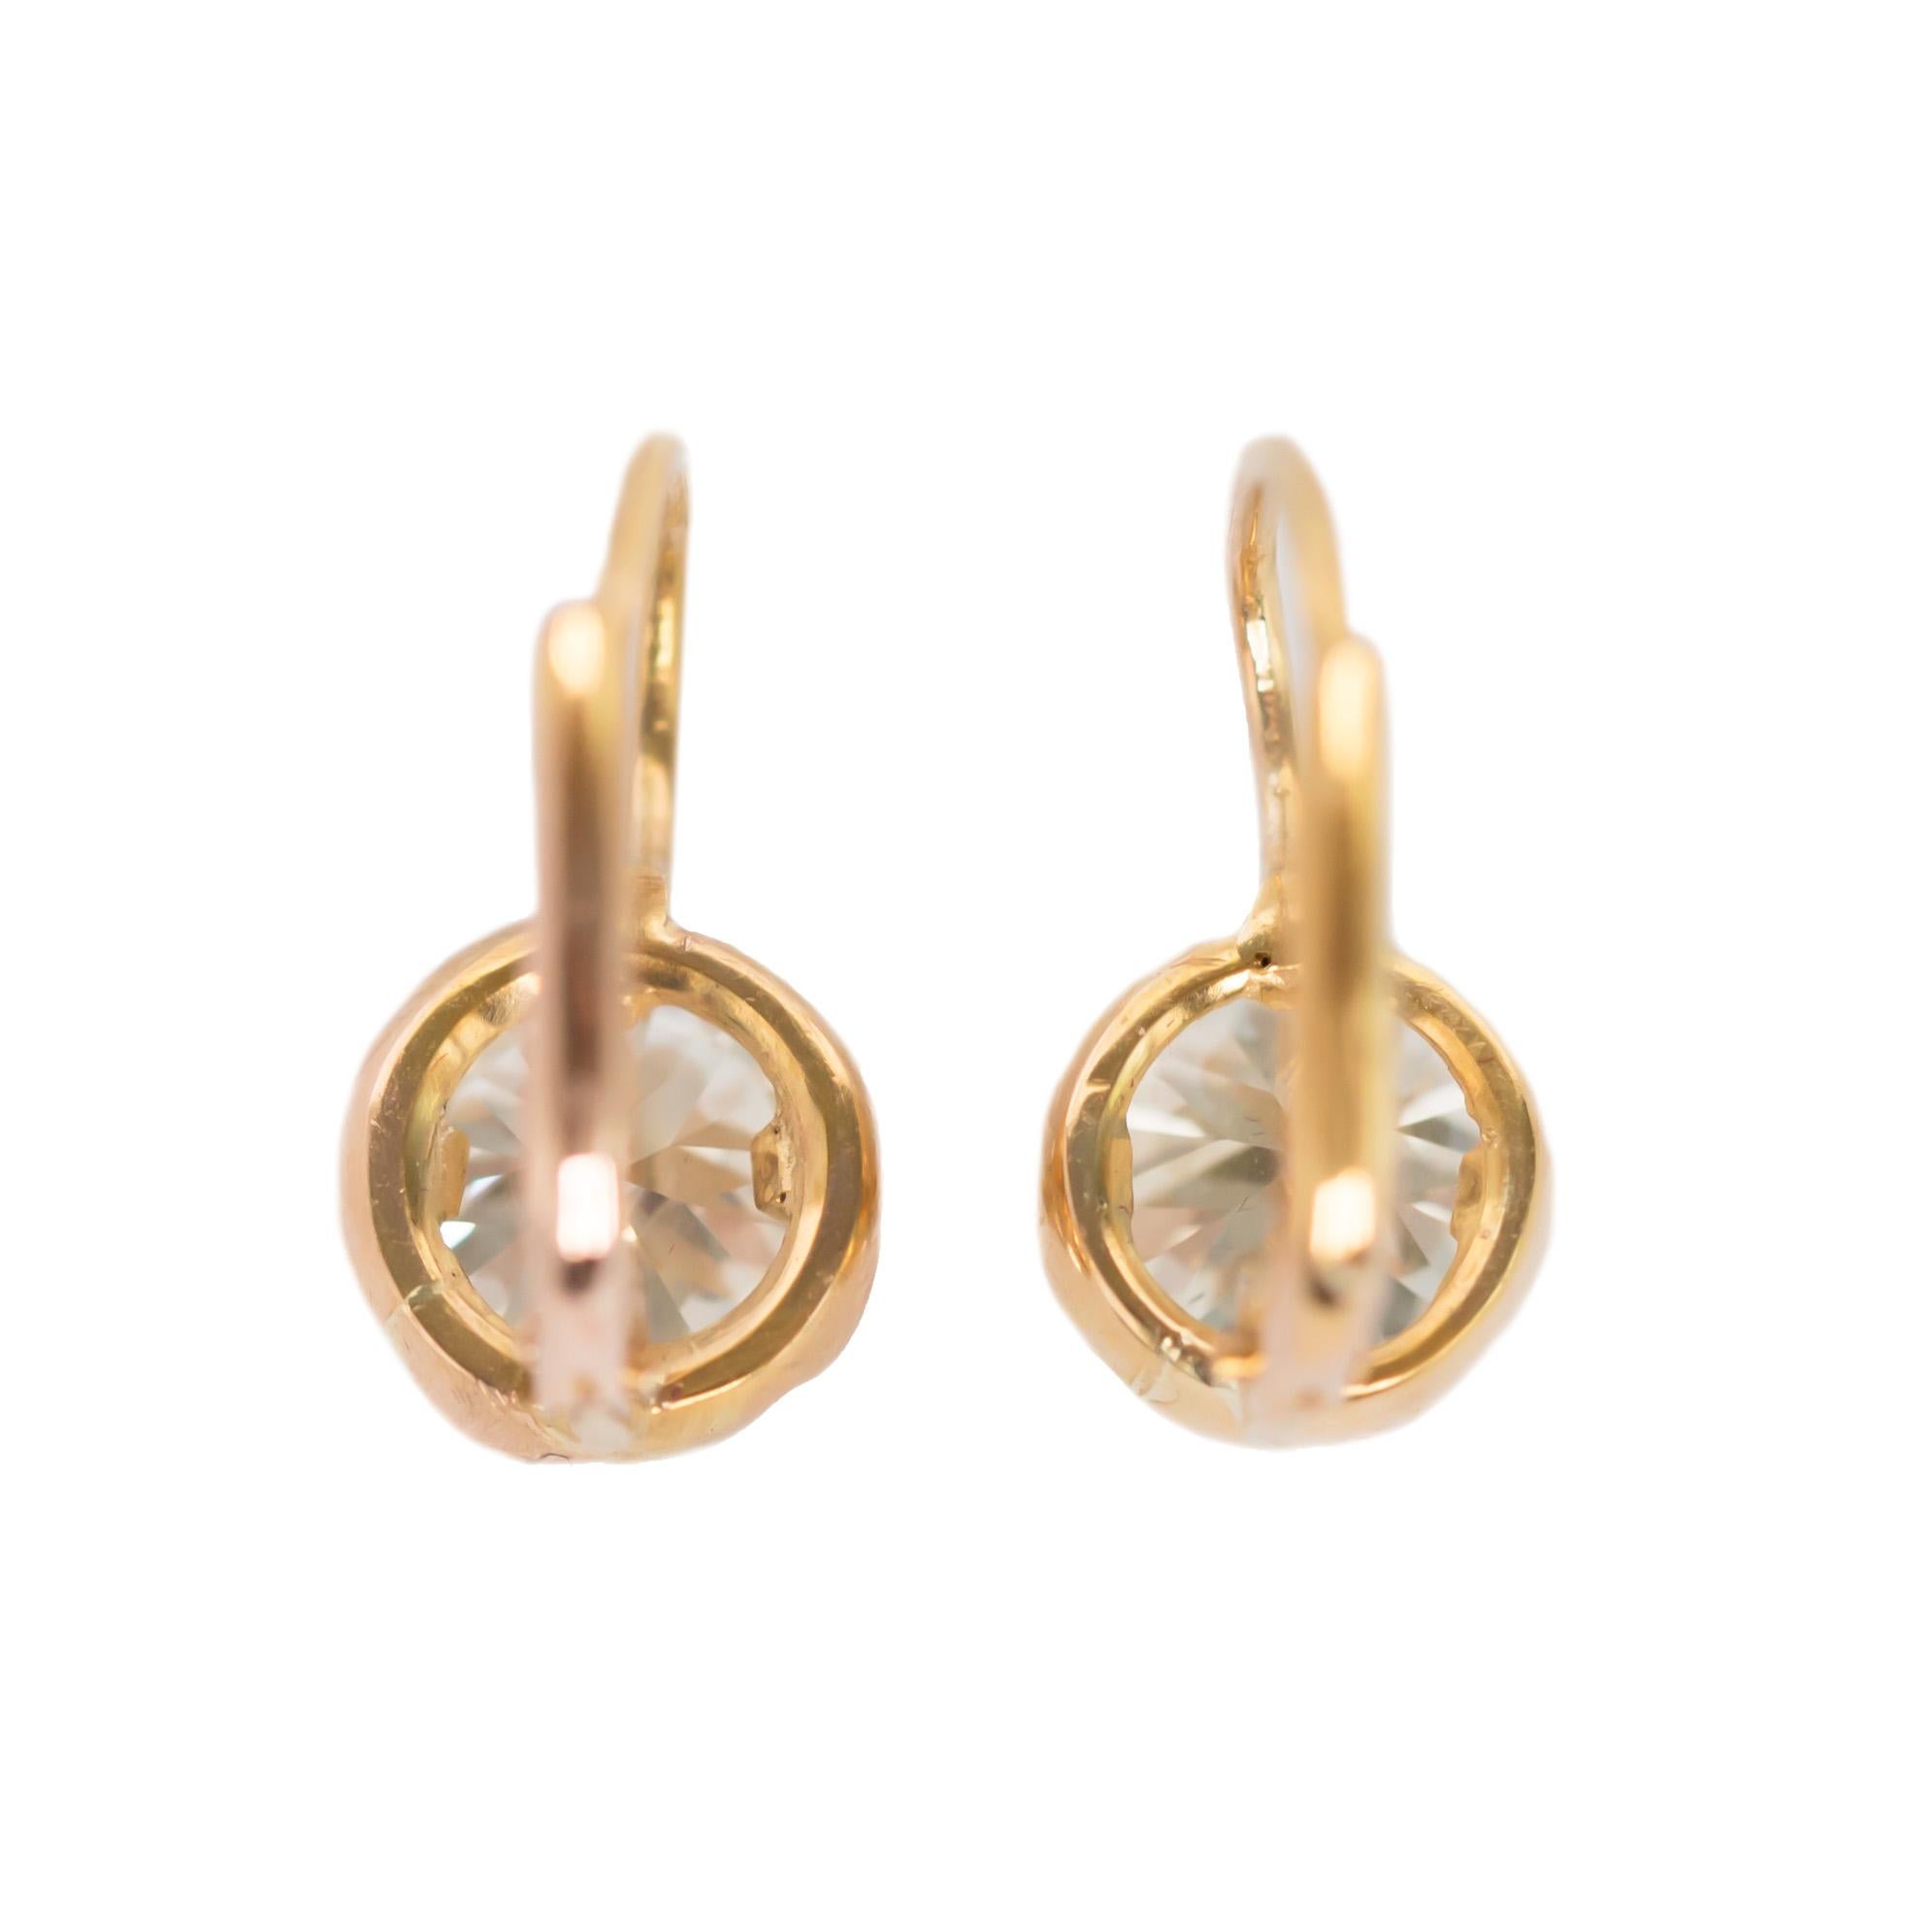 1.95 Carat Total Weight Yellow Gold Diamond Earrings In Good Condition For Sale In Atlanta, GA